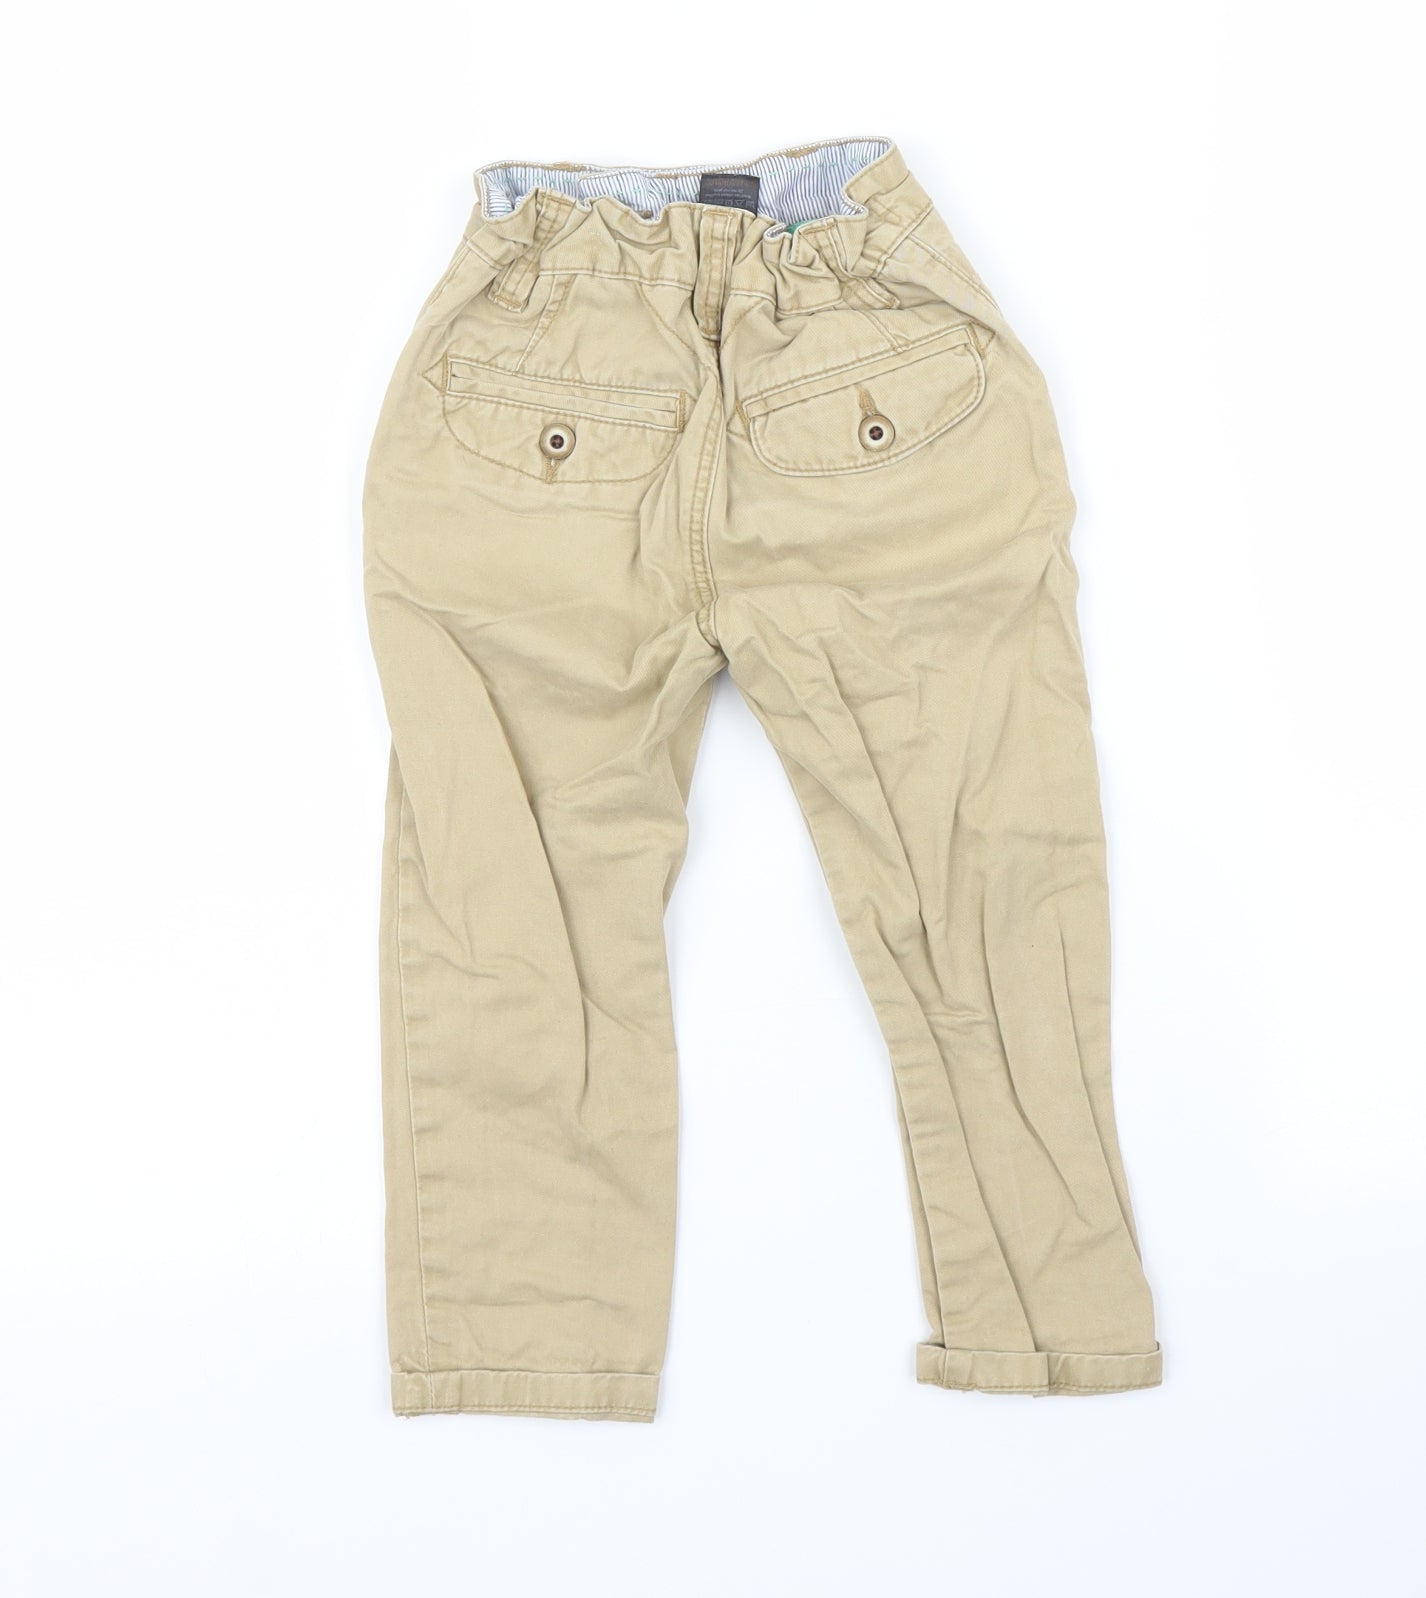 NEXT Boys Beige   Chino Trousers Size 3 Years